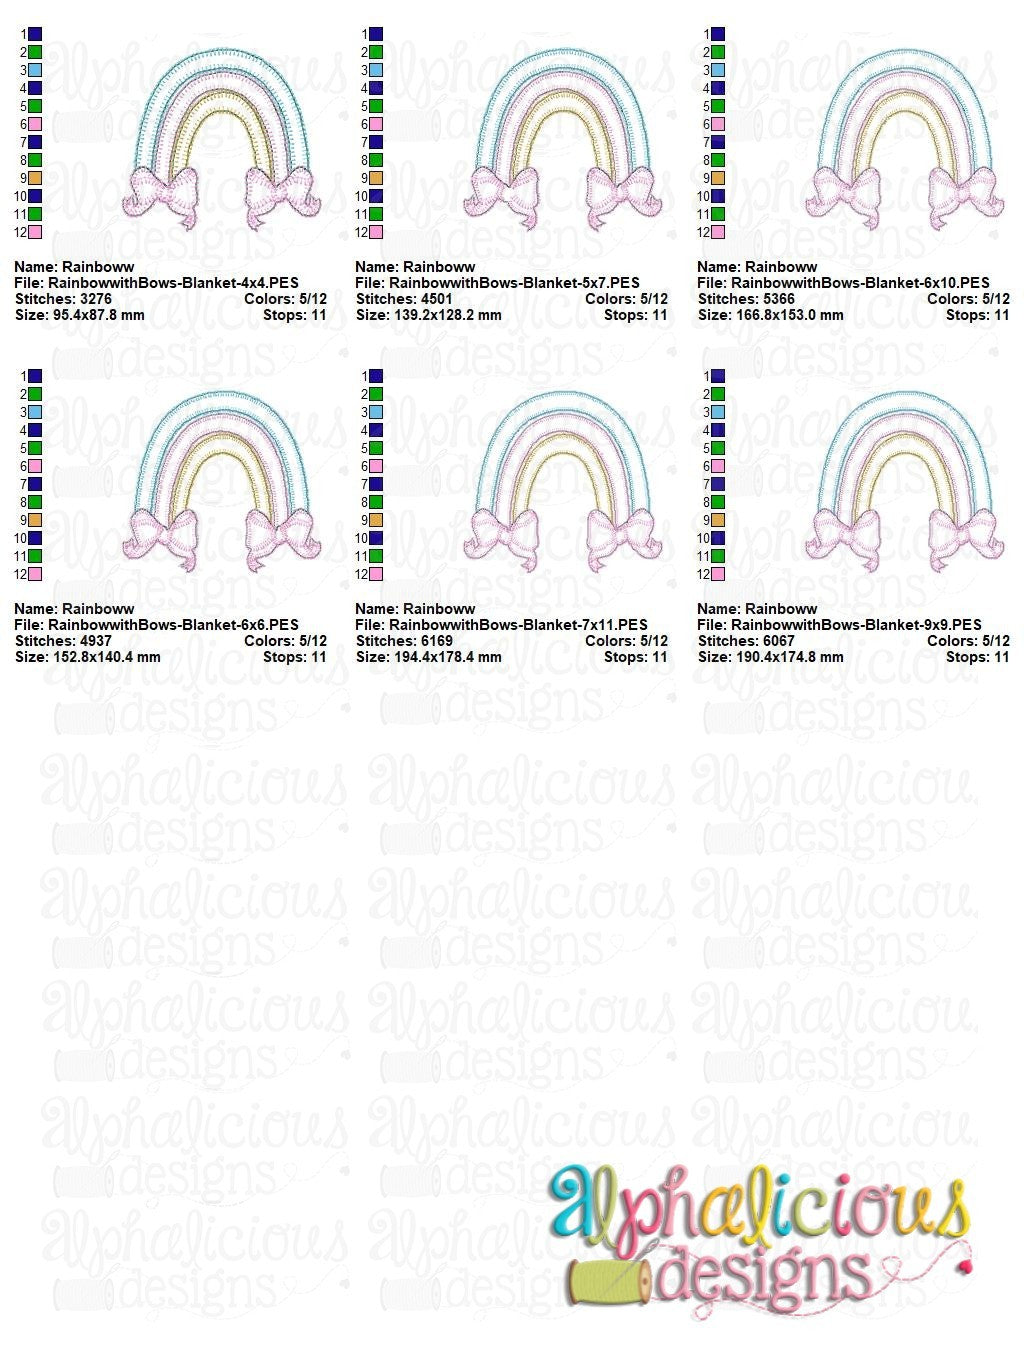 Rainbow with Bows- Blanket